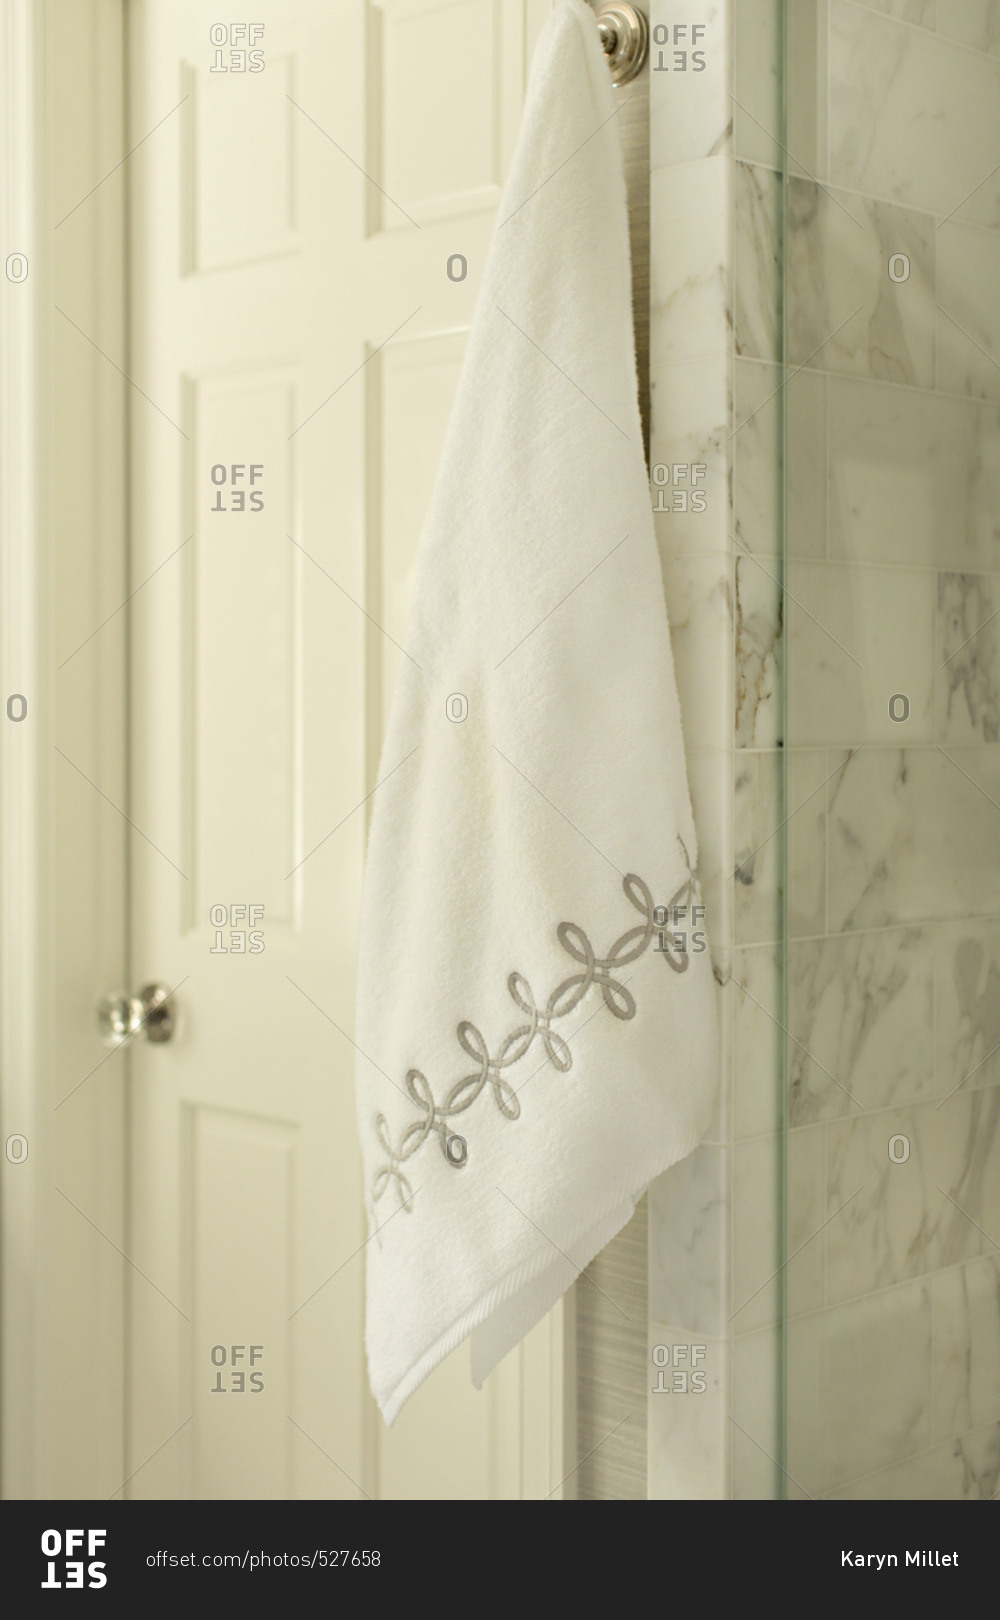 Embroidered towel hanging on hook in bathroom